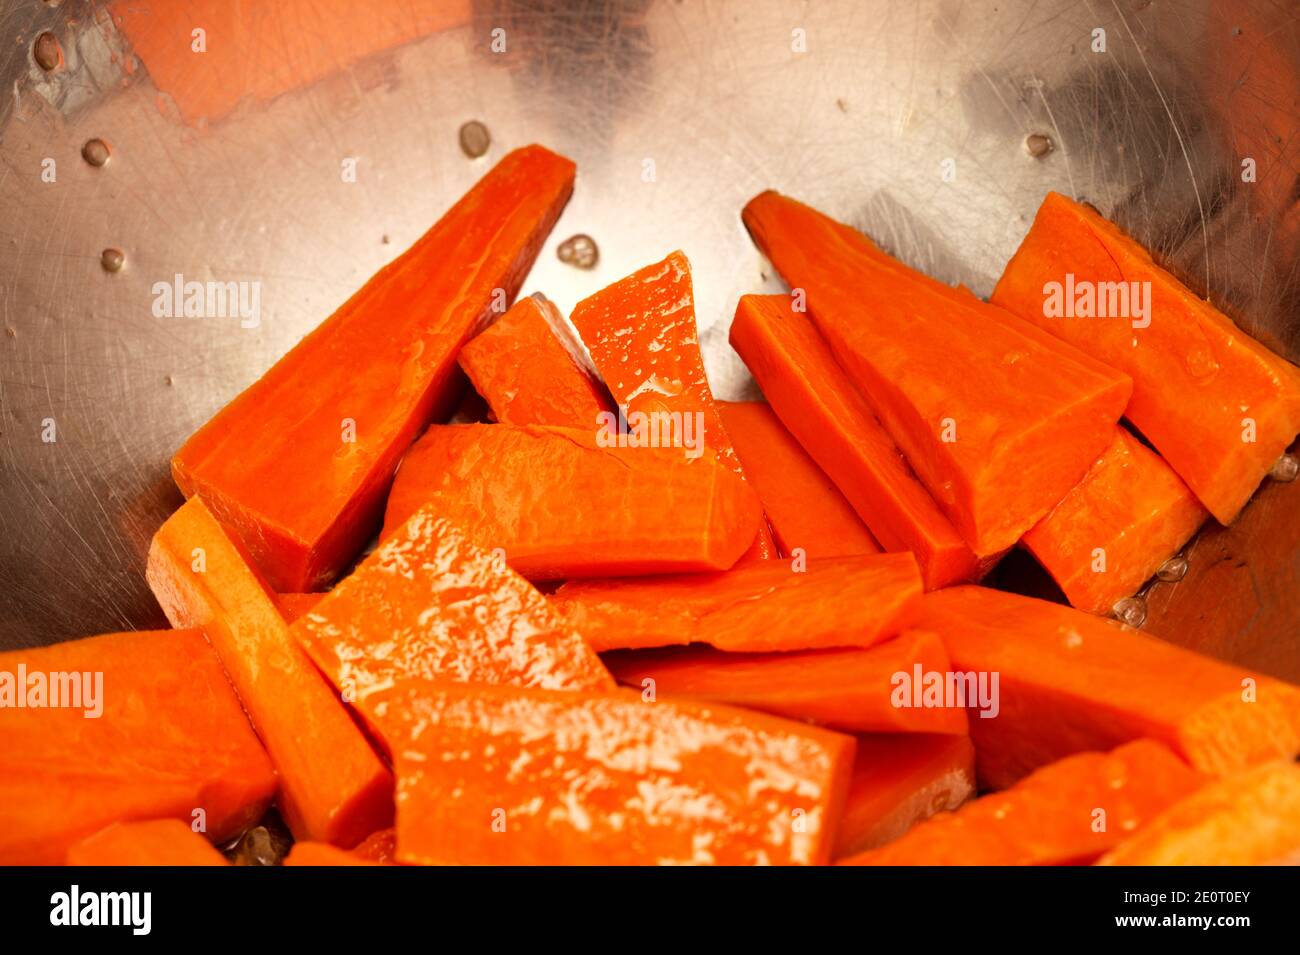 Cut sweet potato, oiled and salted, prepared for roasting Stock Photo